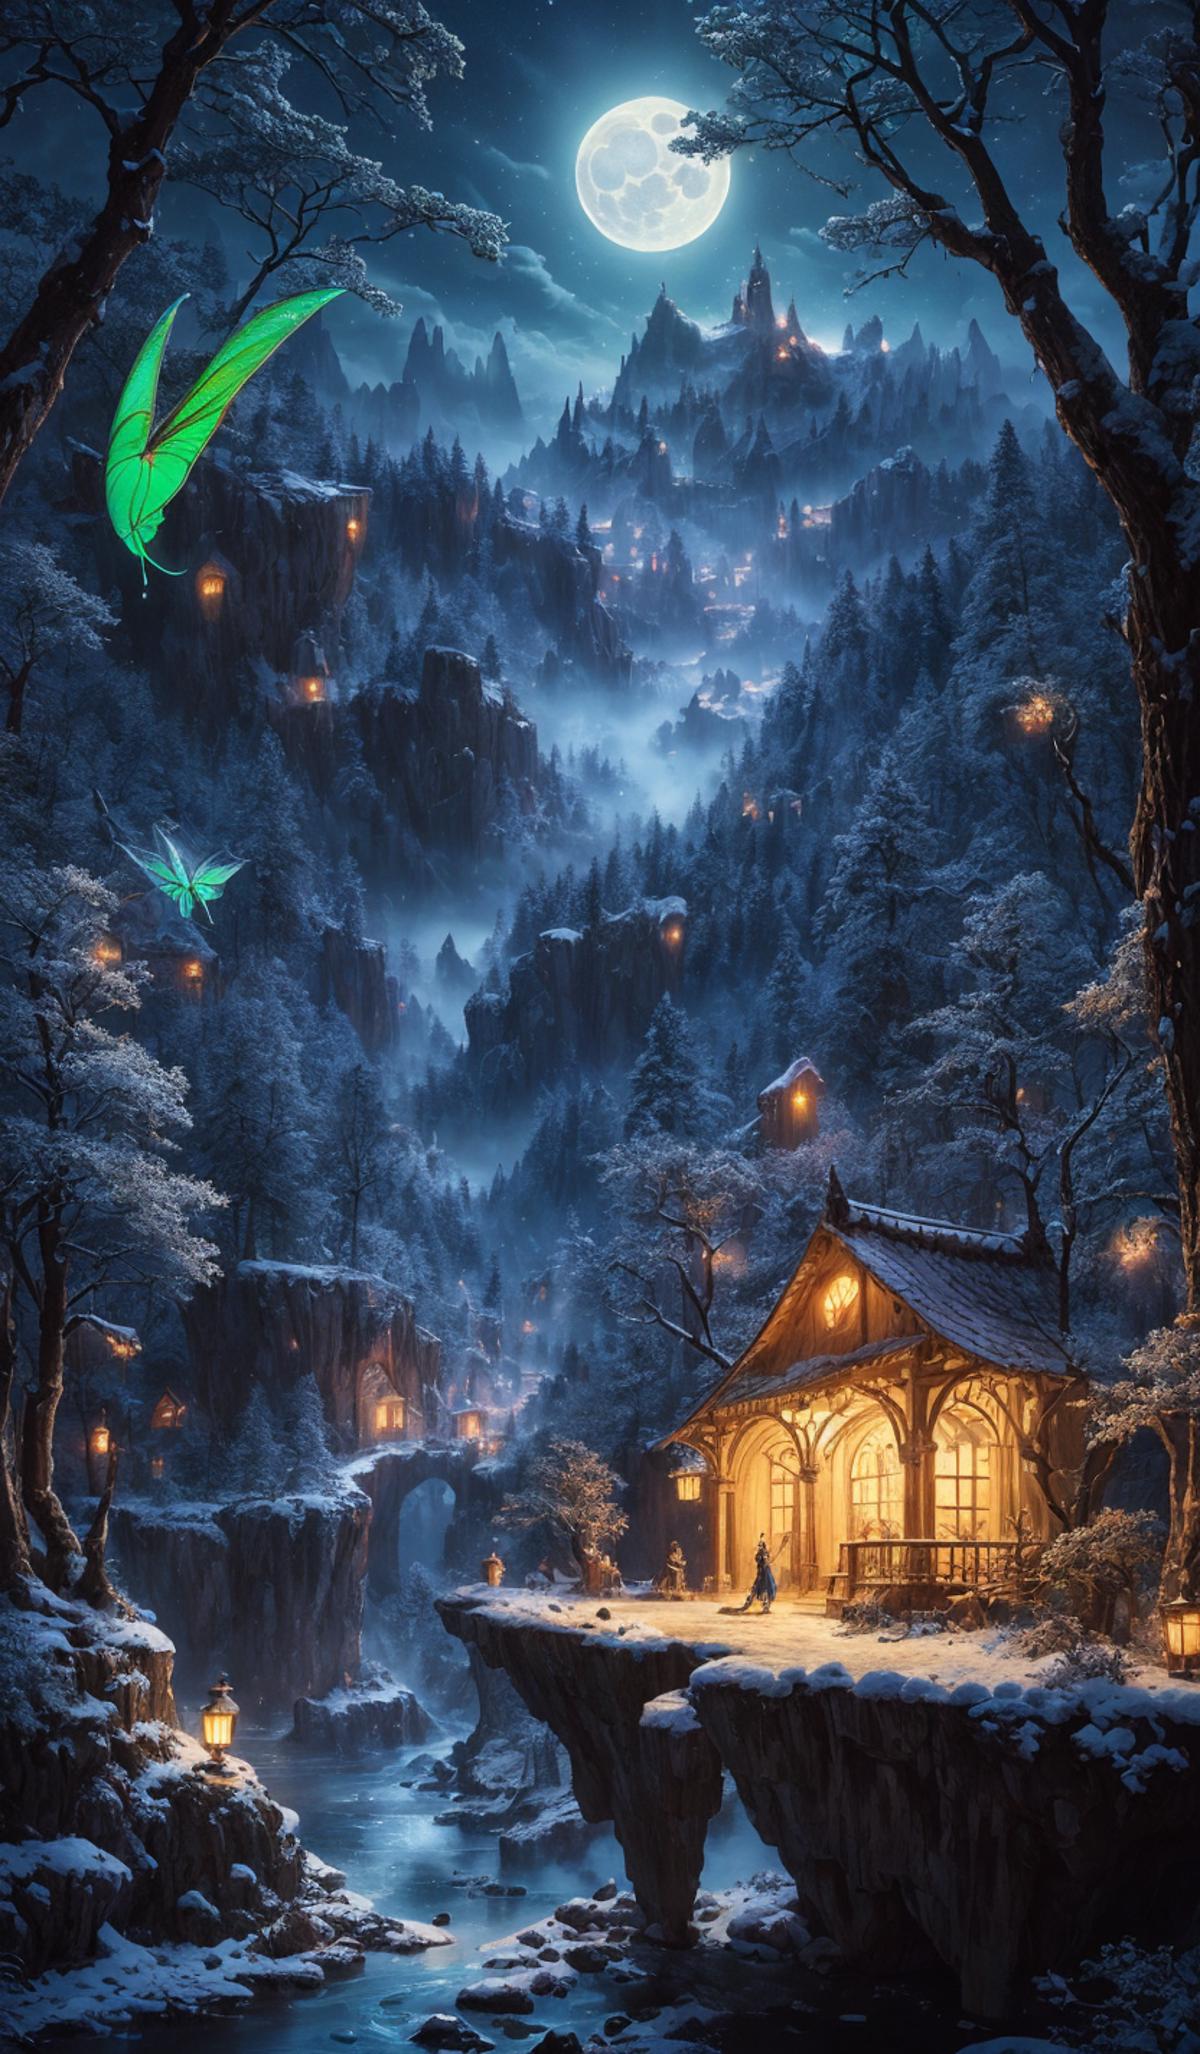 A Dreamy Winter Scene with a Snowy Cabin, Mountain, and Flying Butterflies